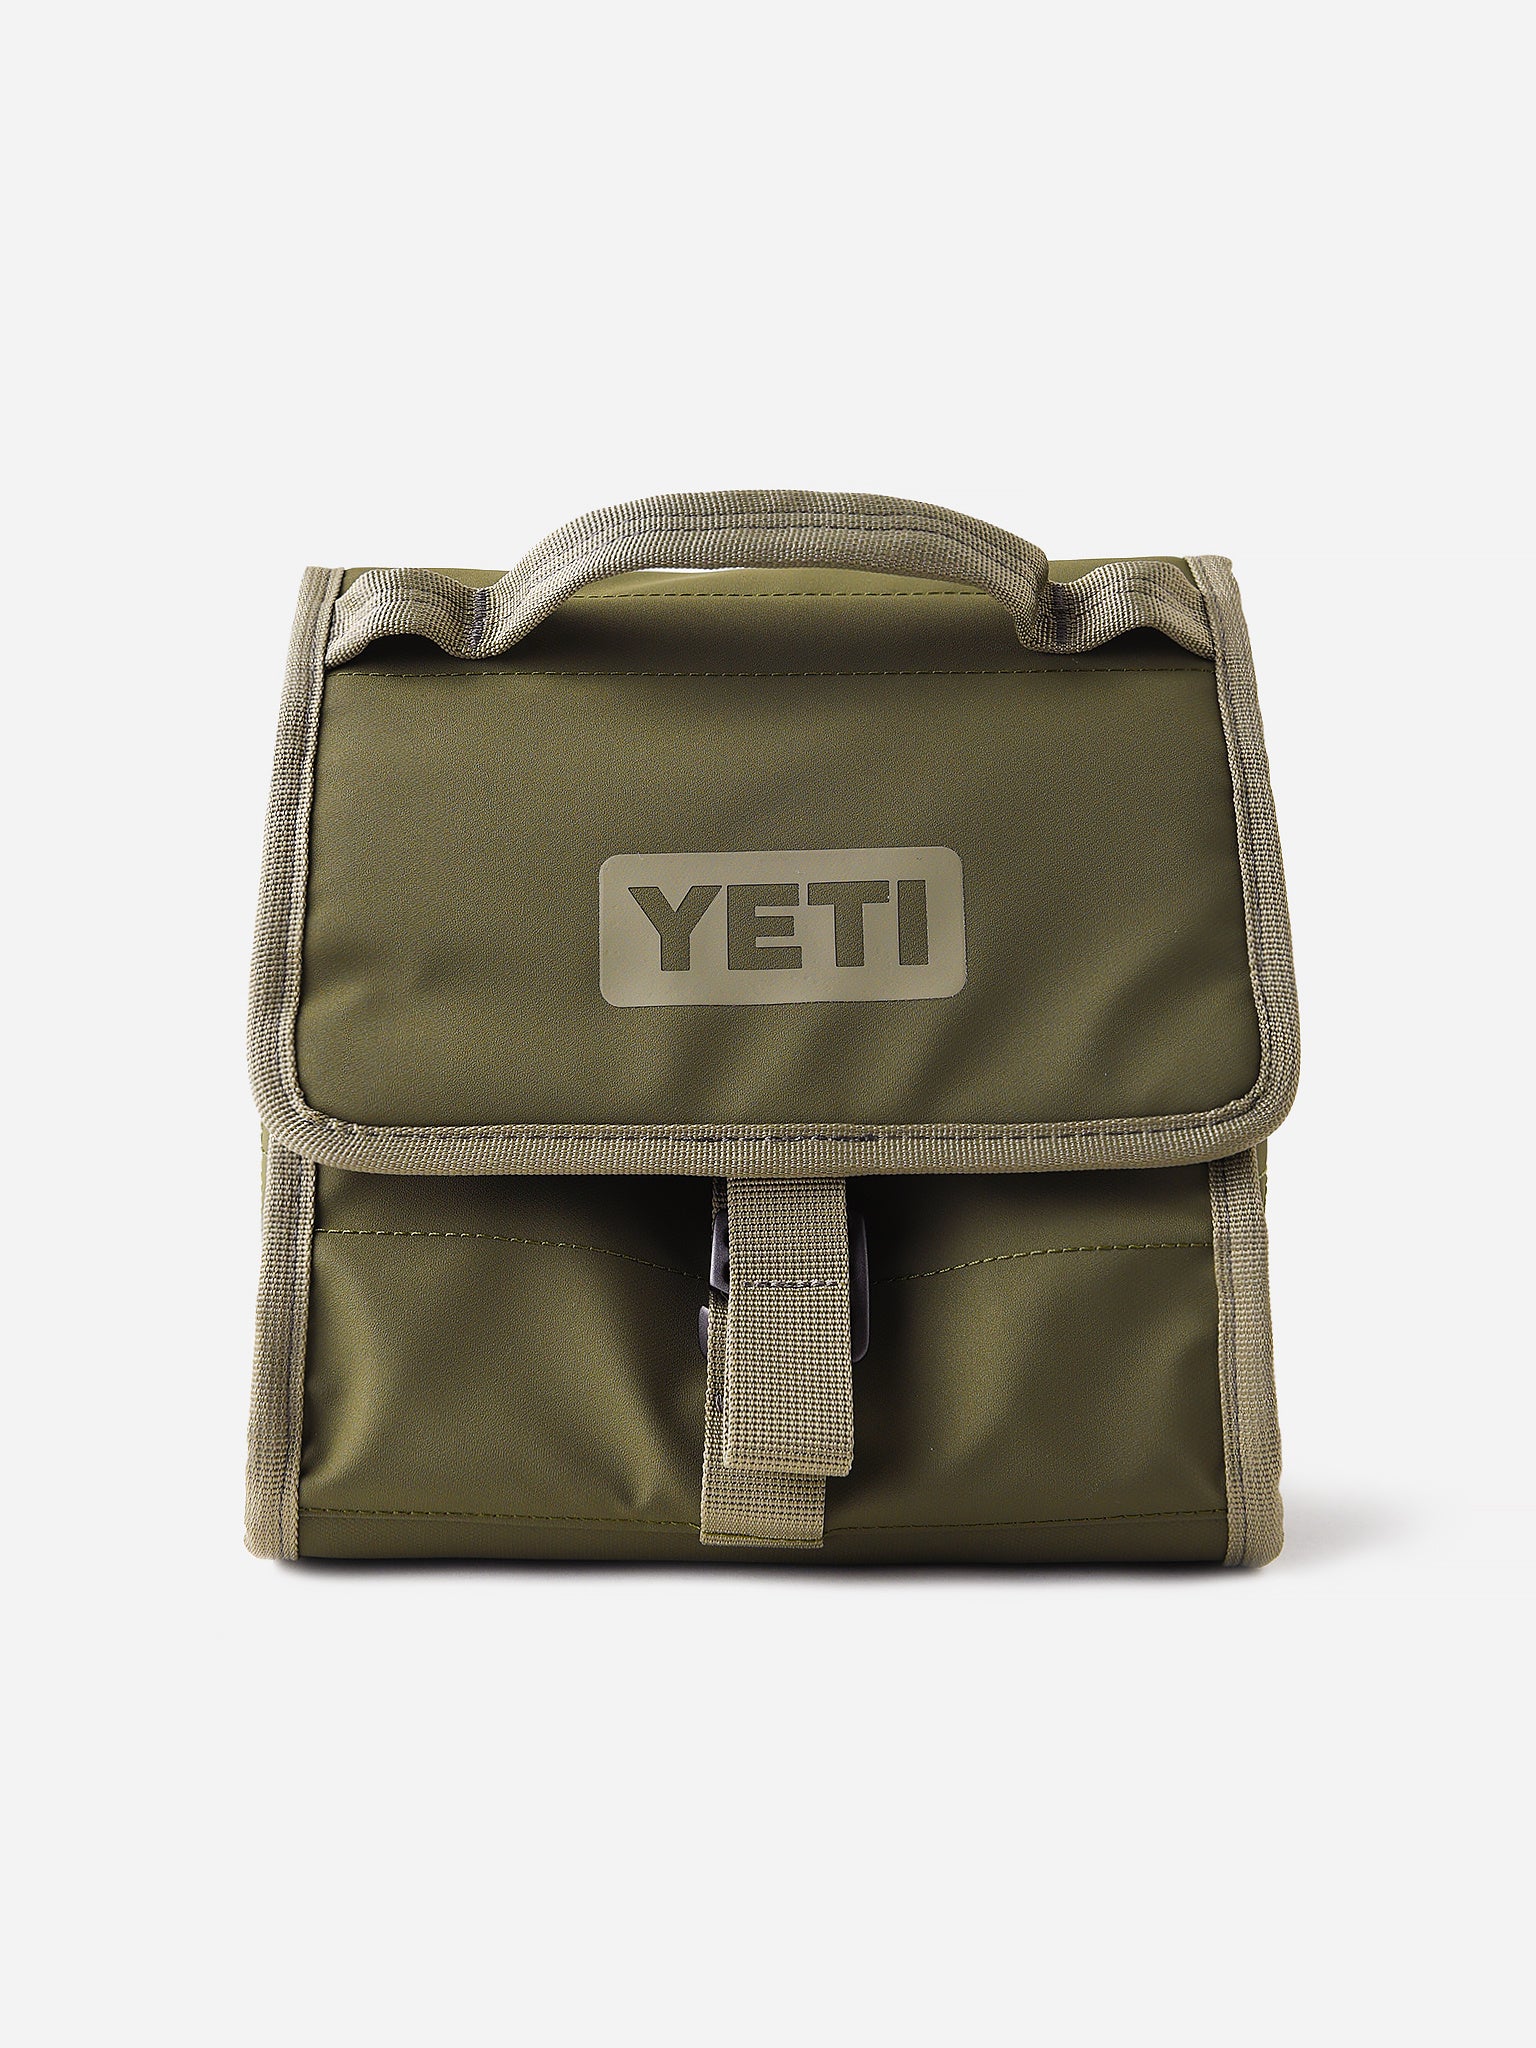 Yeti Daytrip Lunch bag, Coldcell Flex Insulation, Fold and Go Thermo Snap,  Navy